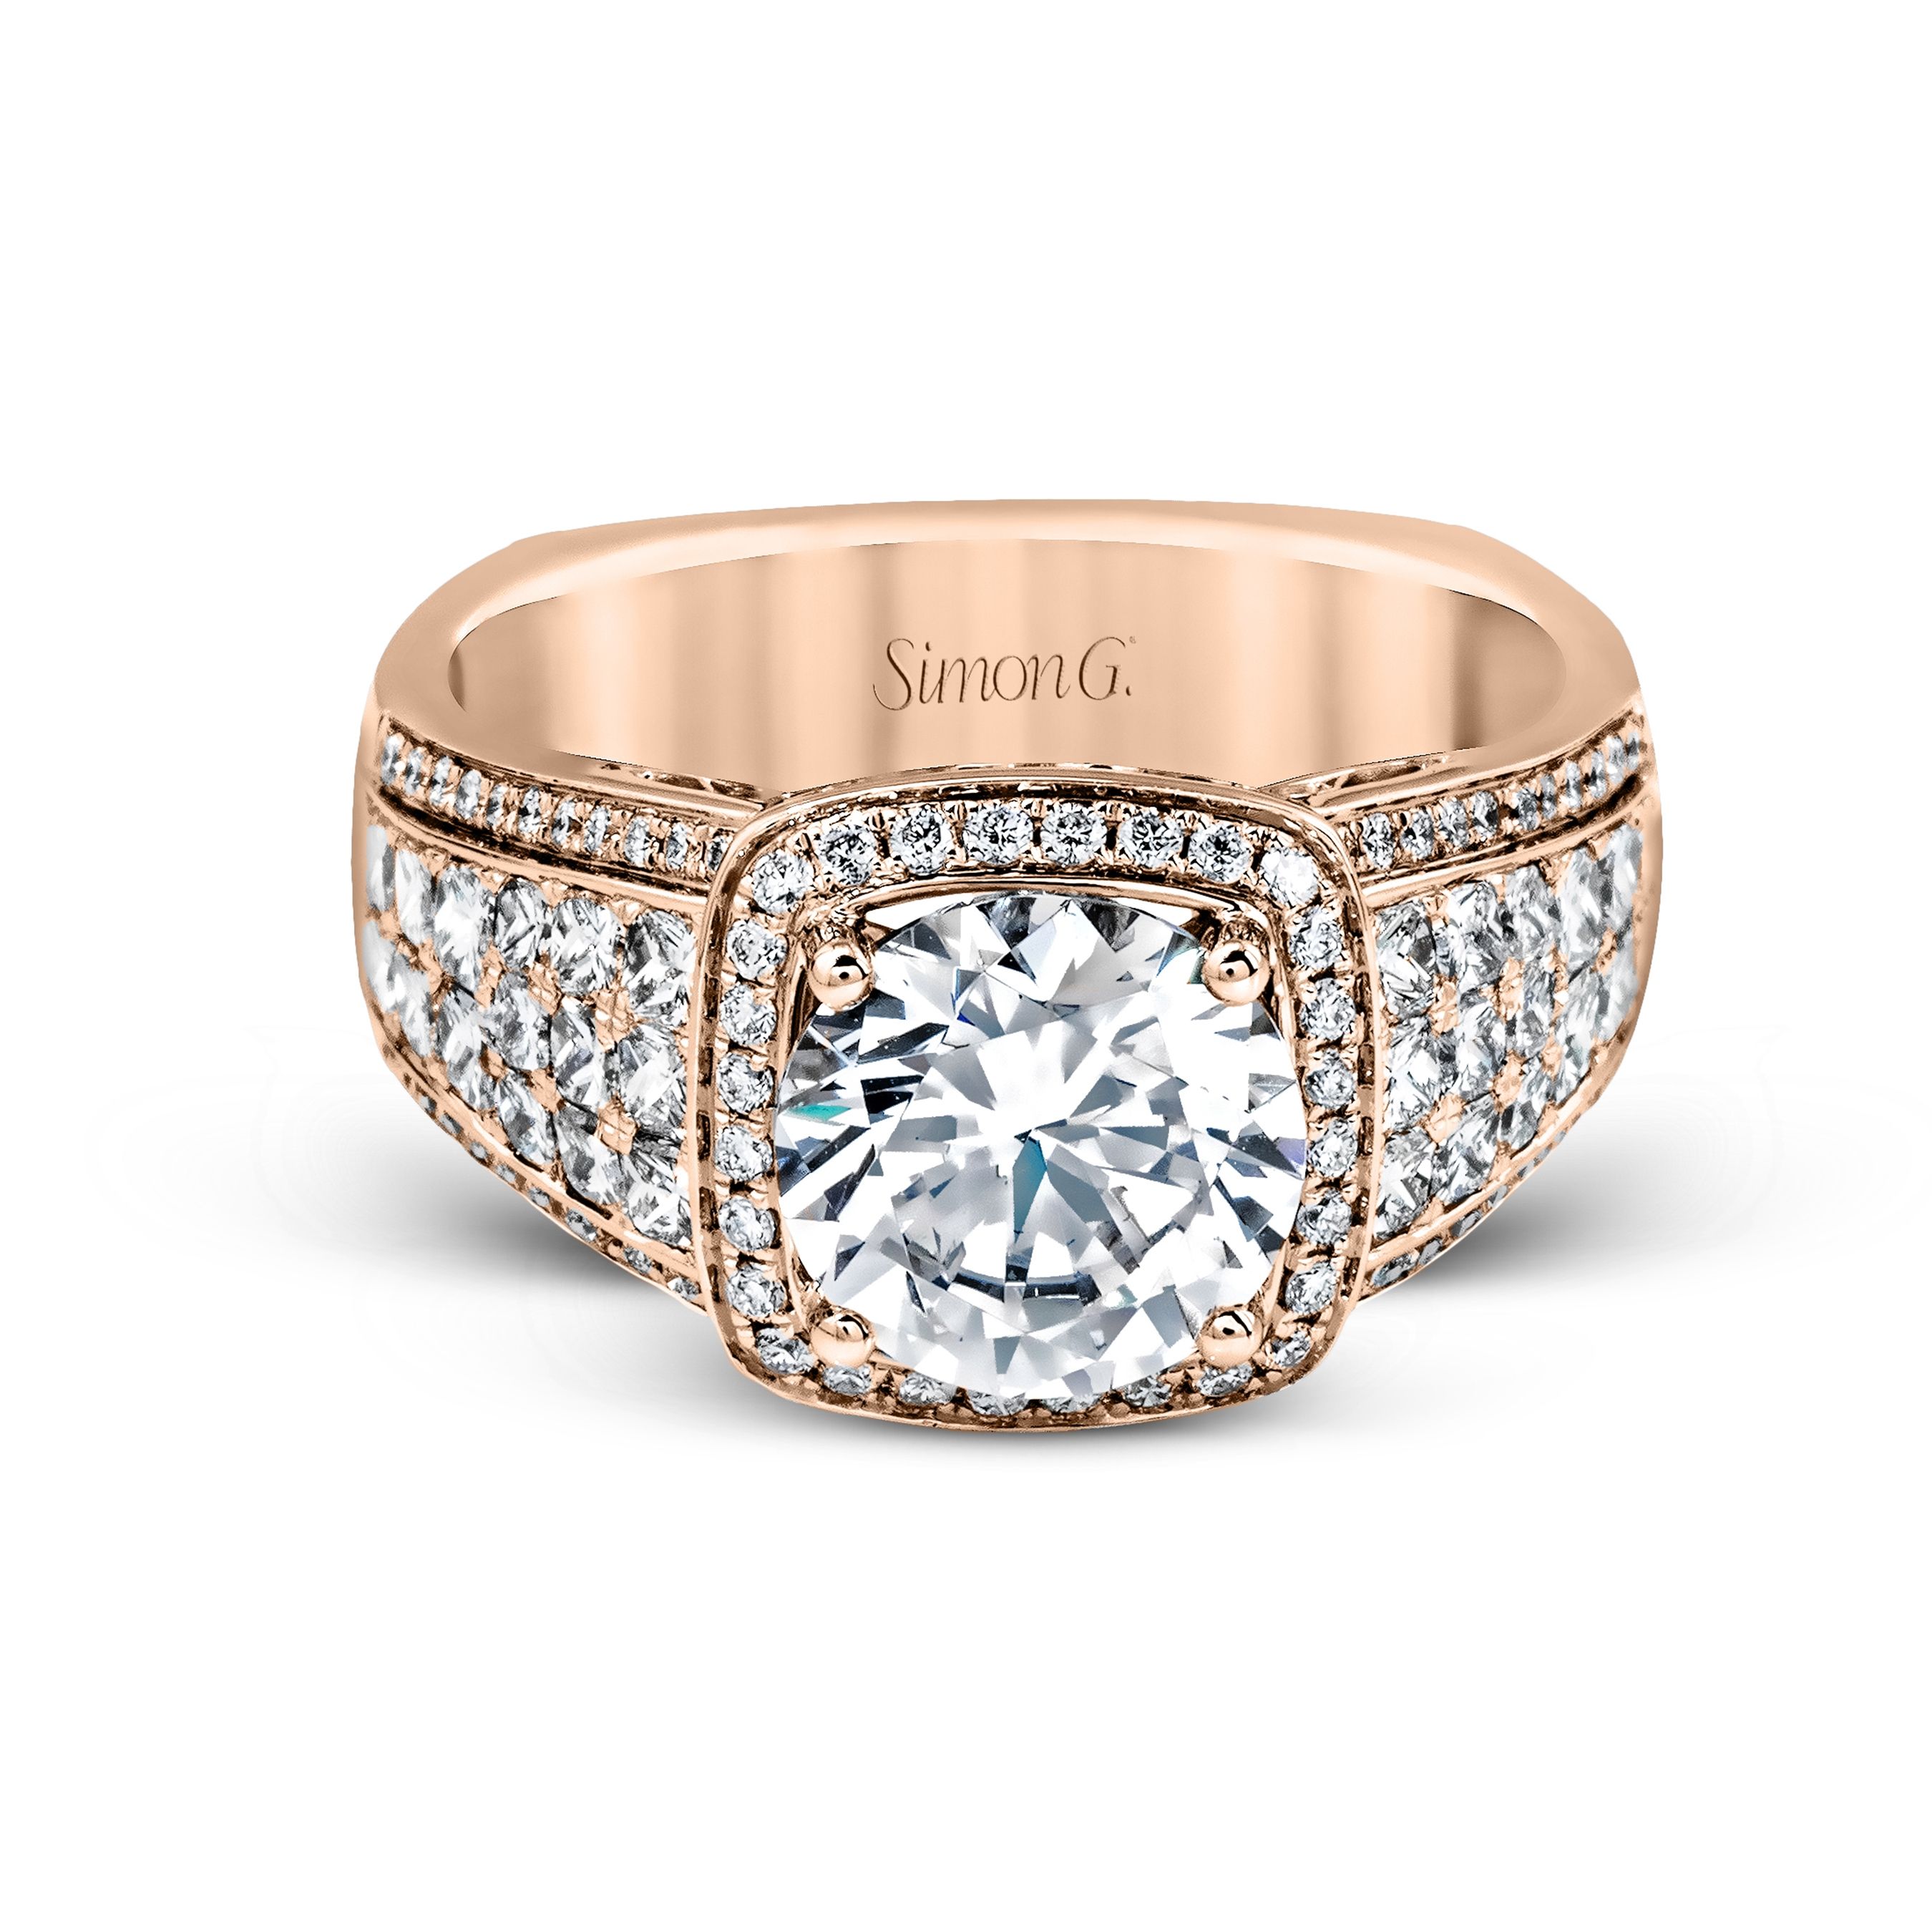 MR2515 Nocturnal Sophistication Collection Rose Gold Round Cut Engagement Ring